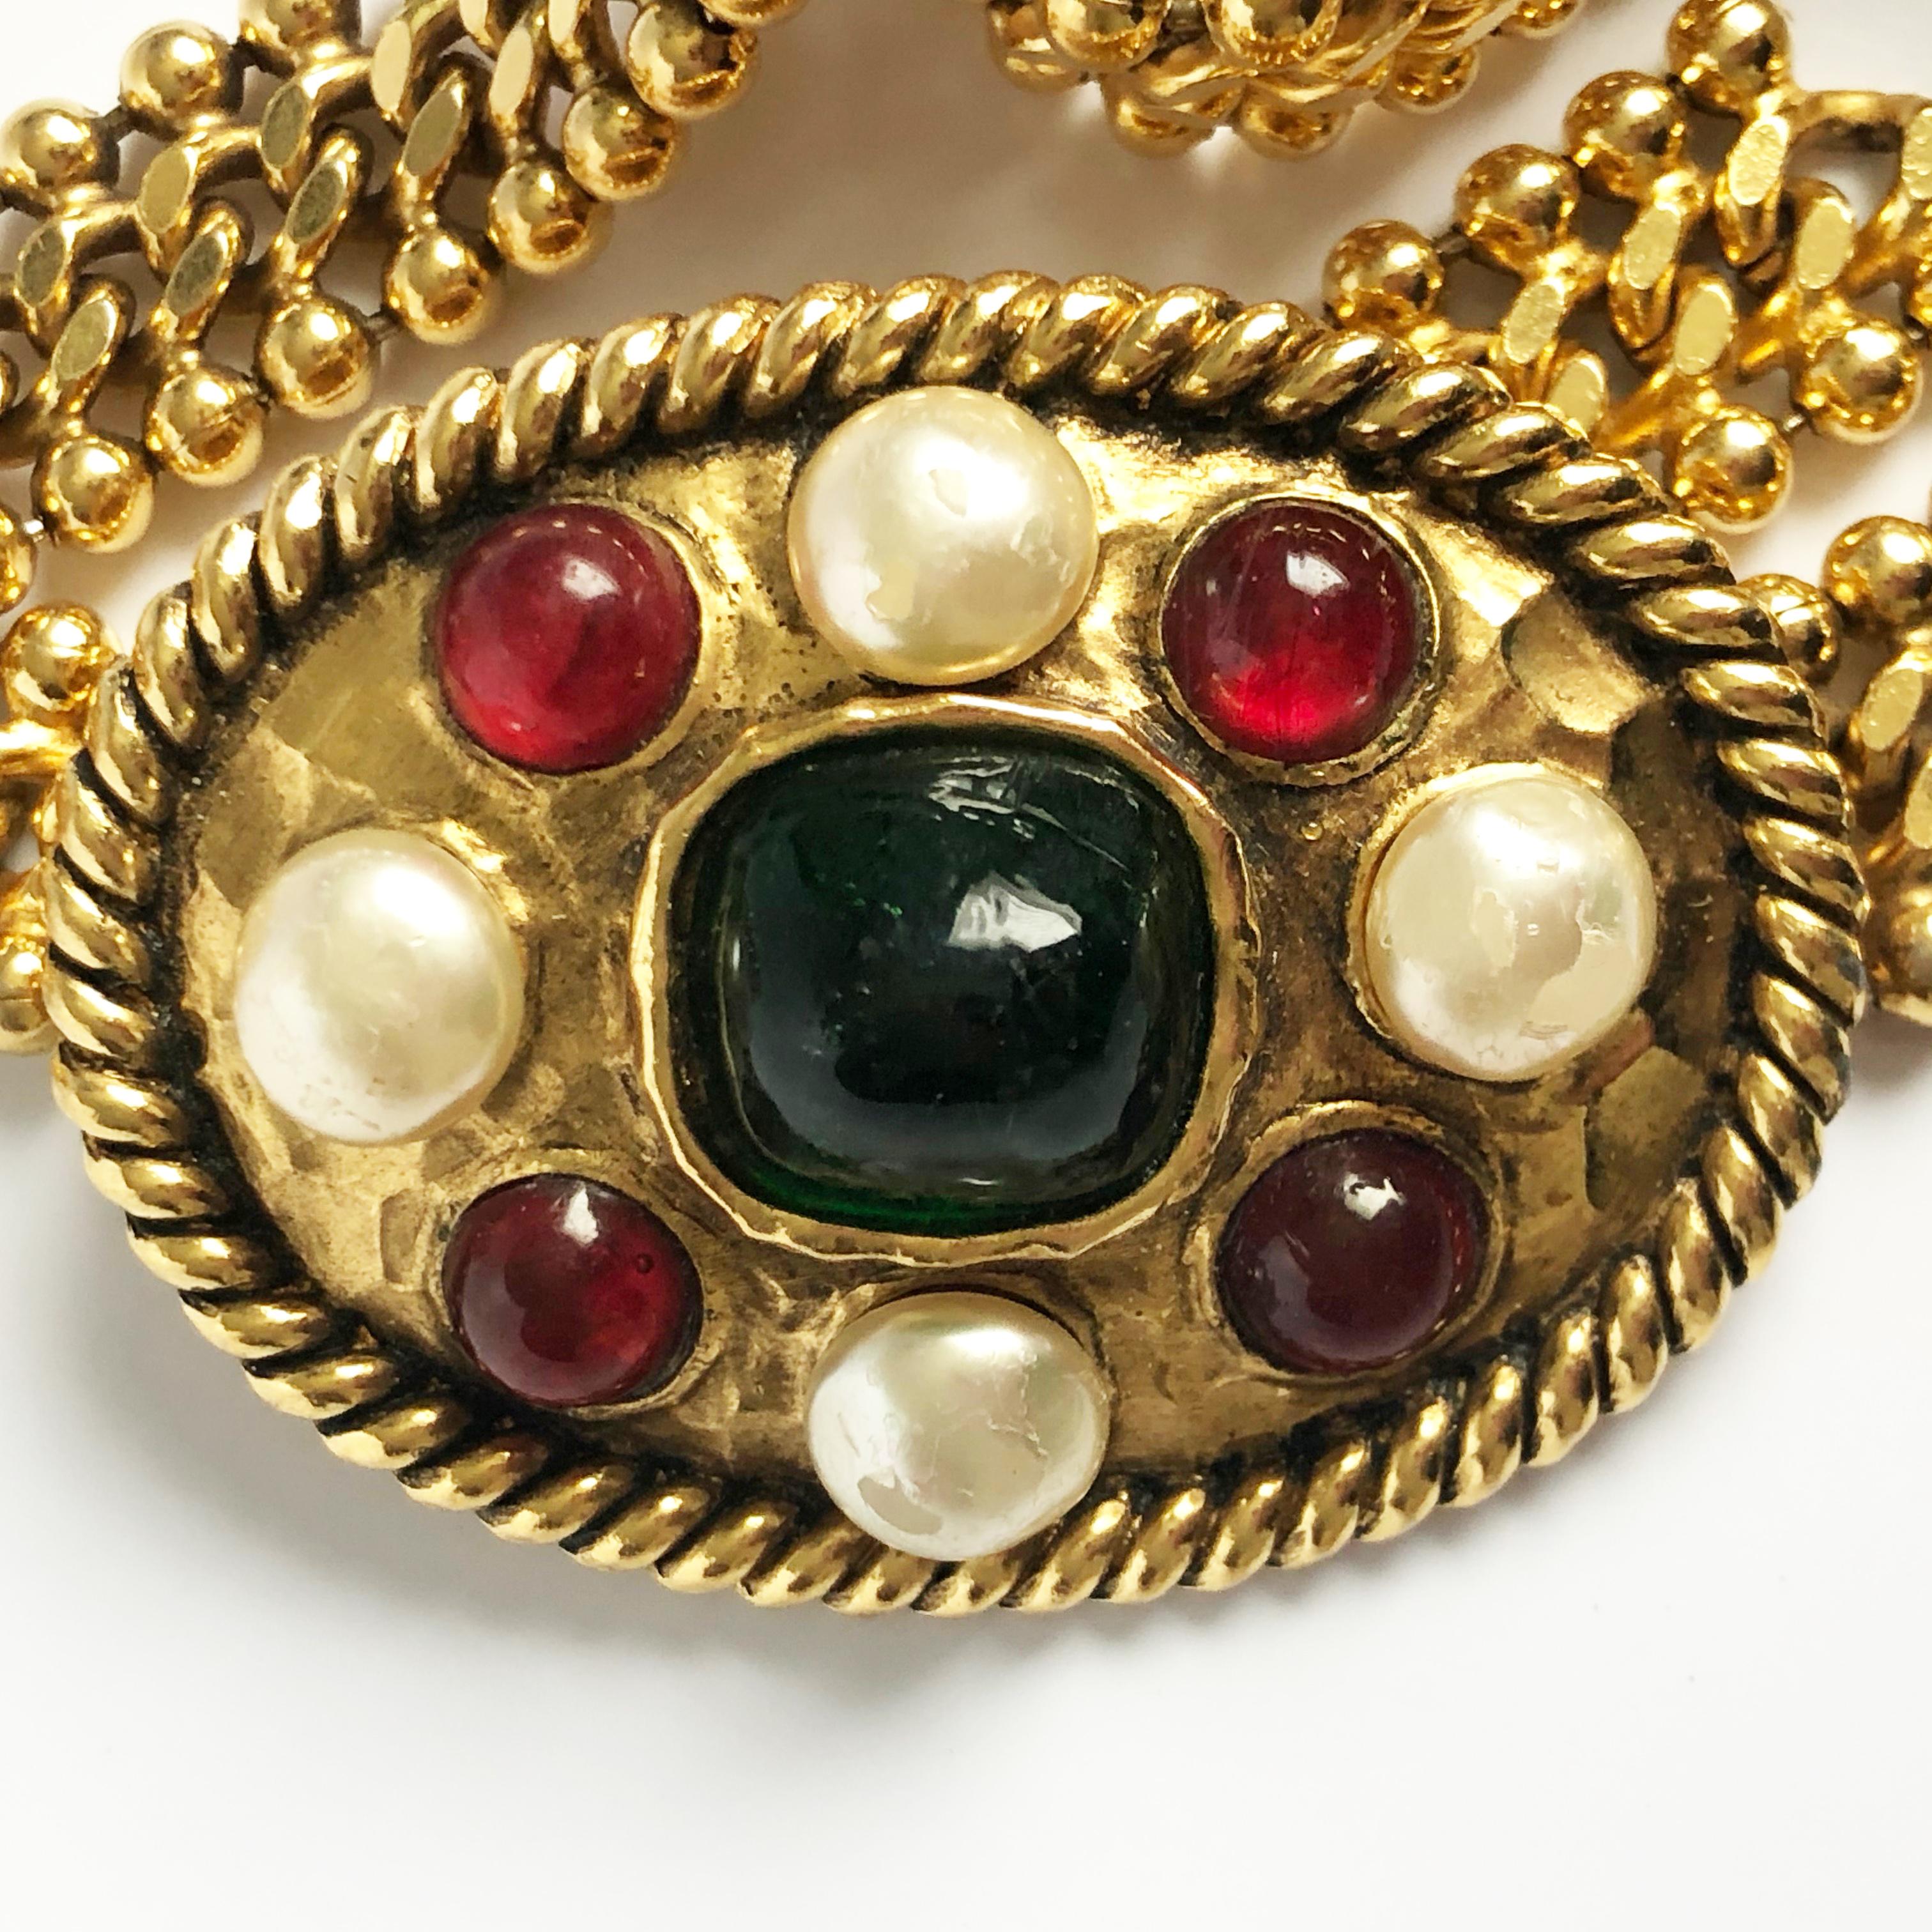 Beige 70s Chanel Byzantine Chain Belt with Faux Pearl Red Green Poured Glass Buckle M